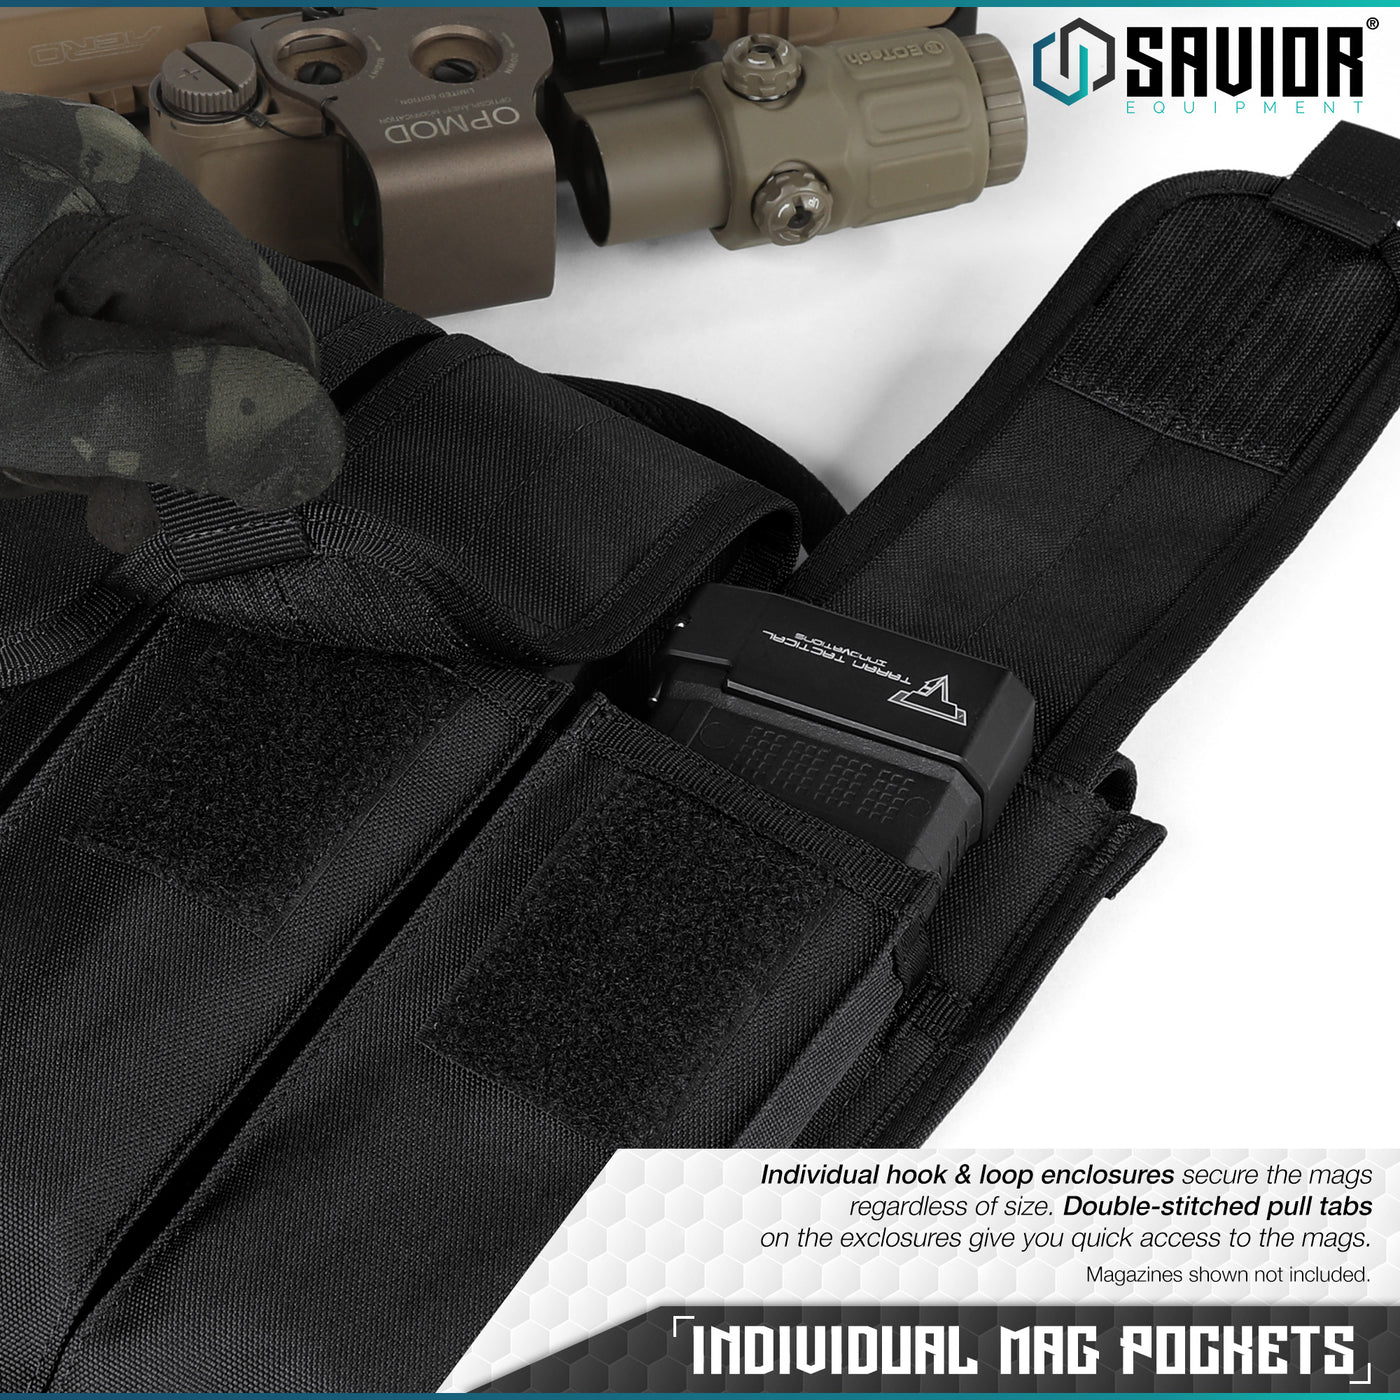 Individual Mag Pockets - Individual hook & loop encloures secure the mags regardless of size. Double-stitched pull tabs on the exclosures give you quick access to the mags. Magazines shown not included.